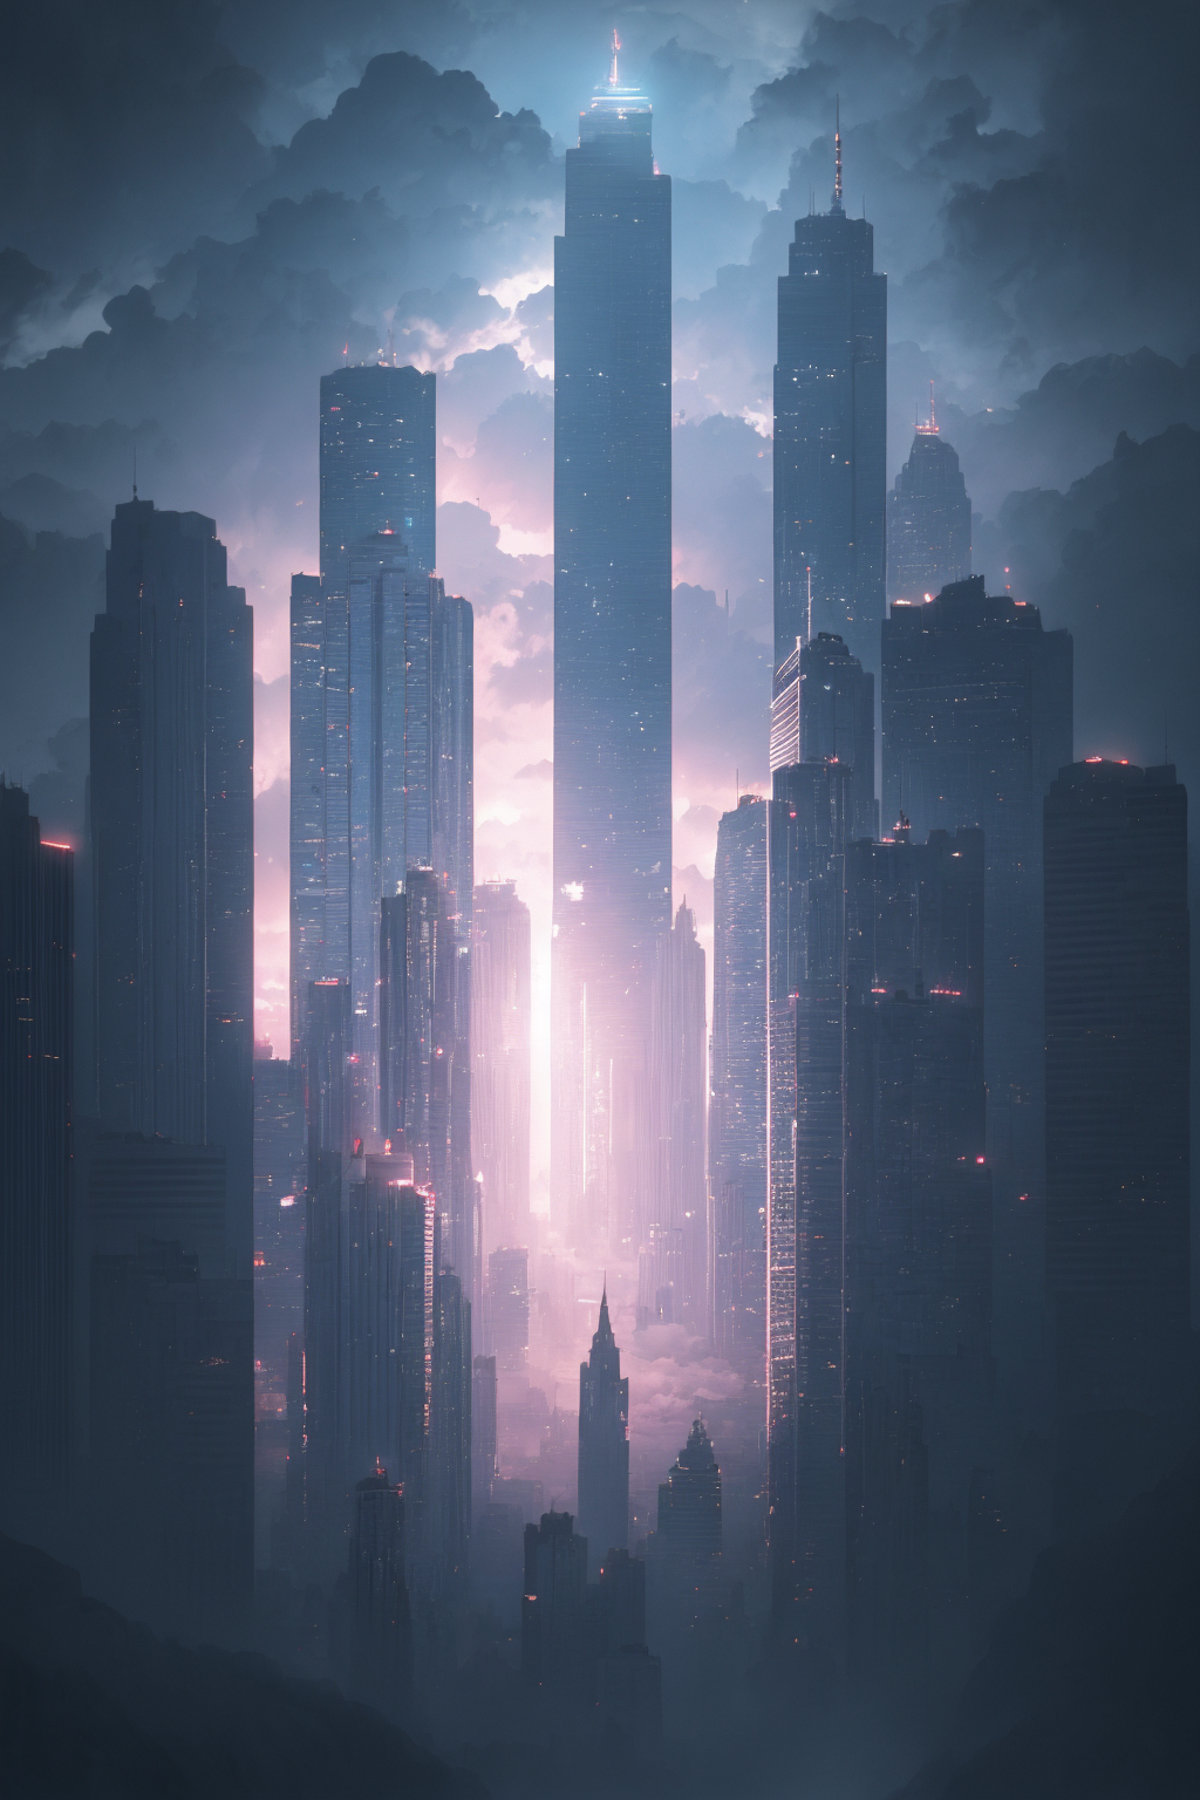 A Cityscape of Tall Buildings and Clouds at Sunset.